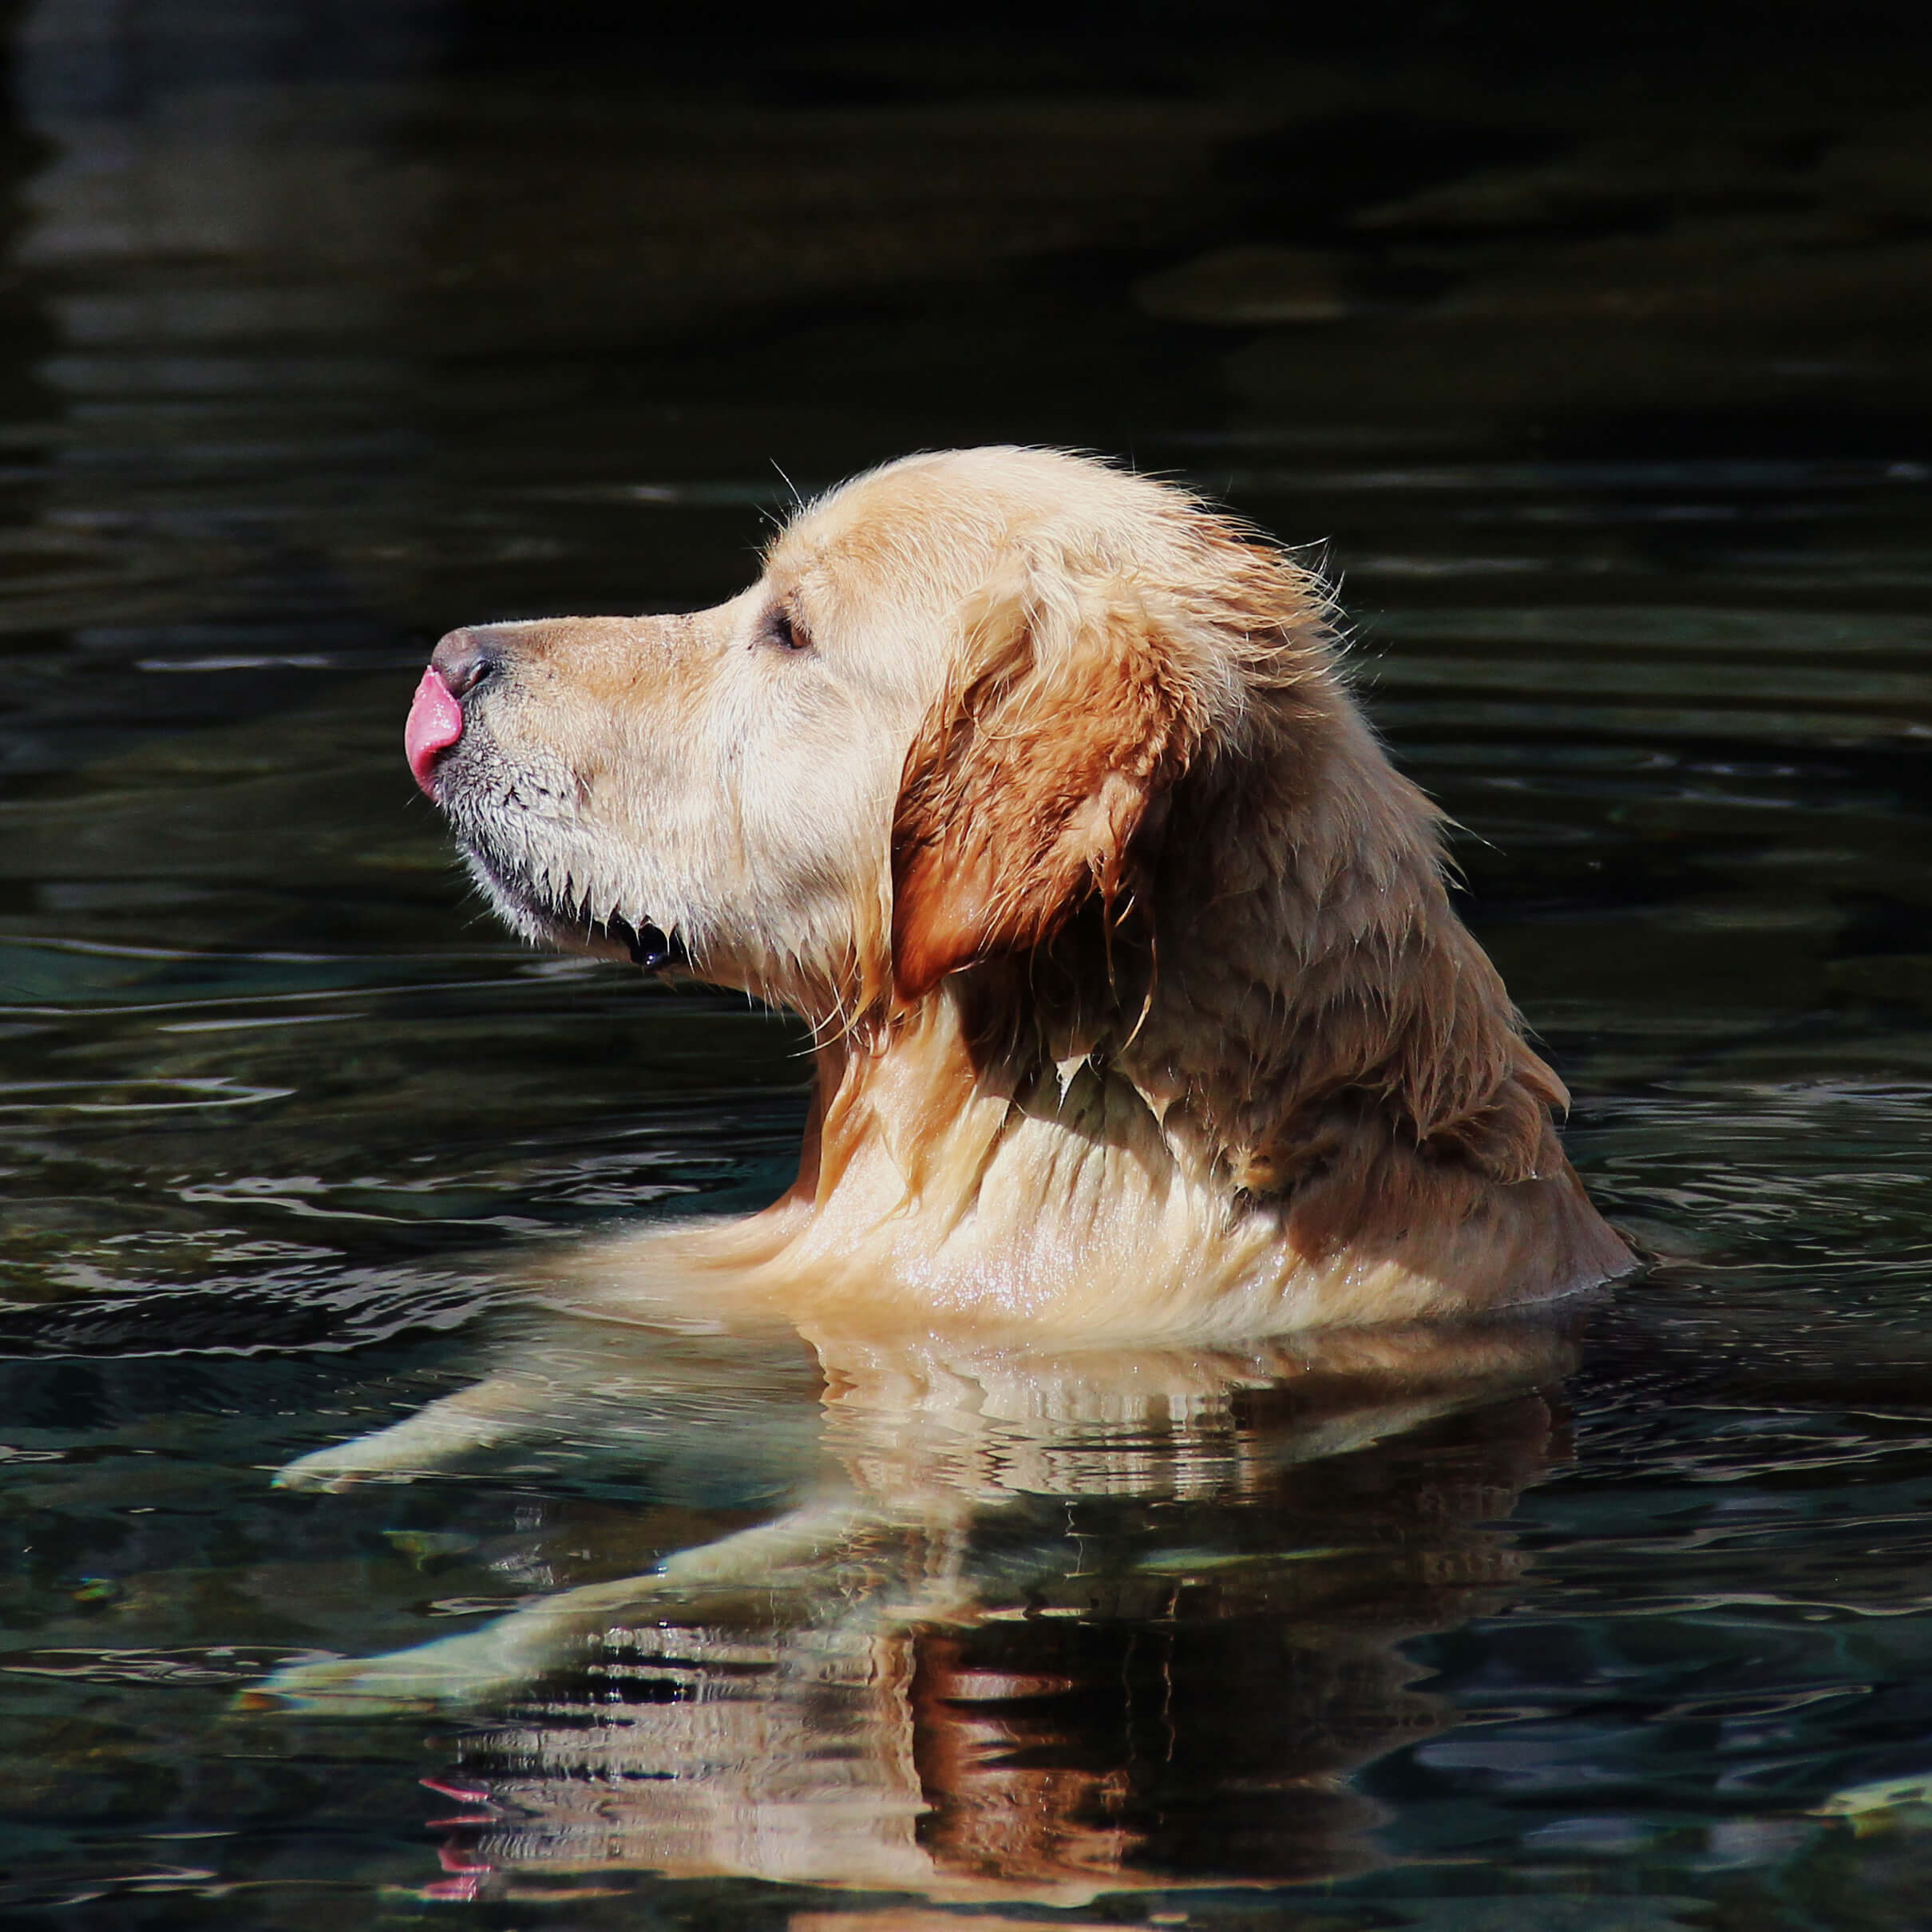 Dog Grooming Tips: Lifestyle influences how often your dog needs a bath